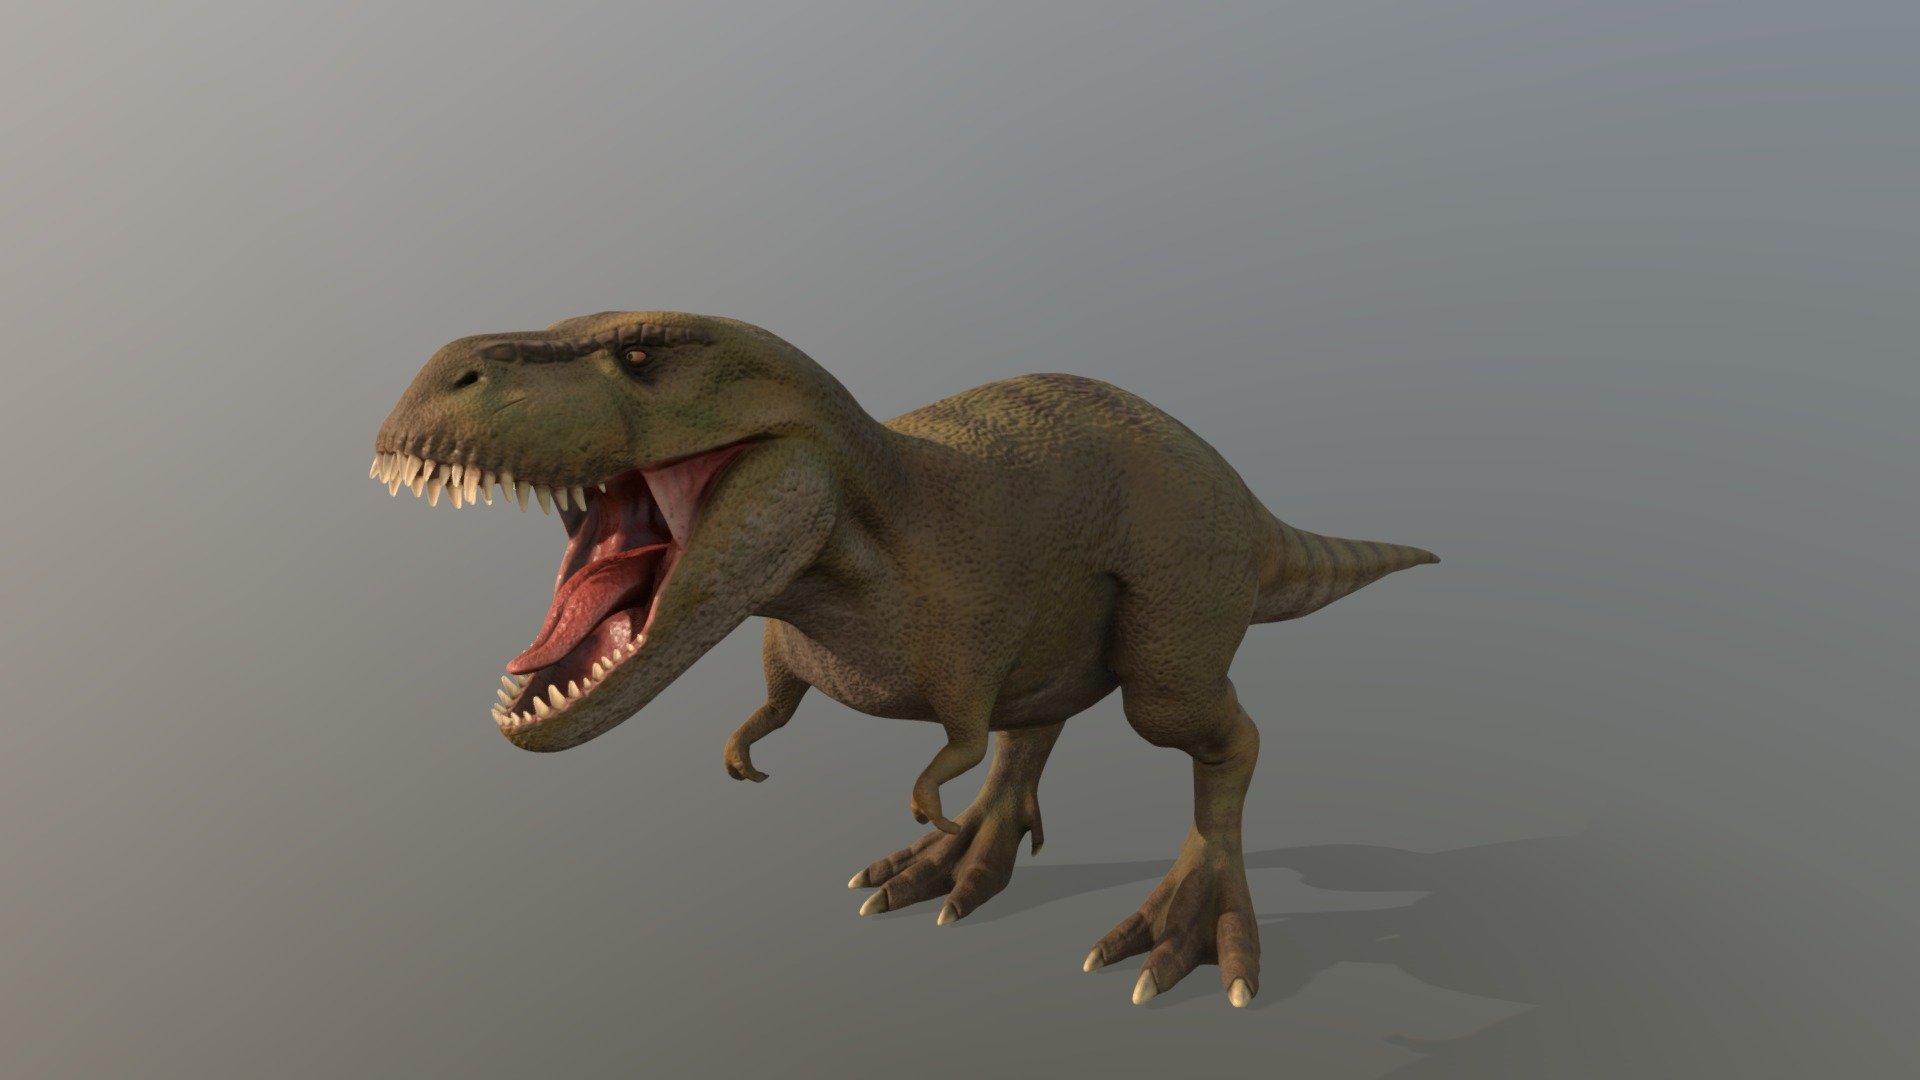 My interpretation of a Tyrannosaurus Rex. 

First full creature sculpt in a while, sculpted fully in zBrush starting with zSpheres to practice the full pipeline.

Sculpted the Primary and Secondary Shapes in zBrush before retopoed and UV'ed in Maya before returning to zBrush for projection and further sculpting into the secondary and tertiary shapes. 

Textures painted in Substance Painter.

Full breakdown on my Artstation.
https://www.artstation.com/artwork/28ORRv - Tyrannosaurus Rex - 3D model by jdbensonCG (@bjohndavid21) 3d model